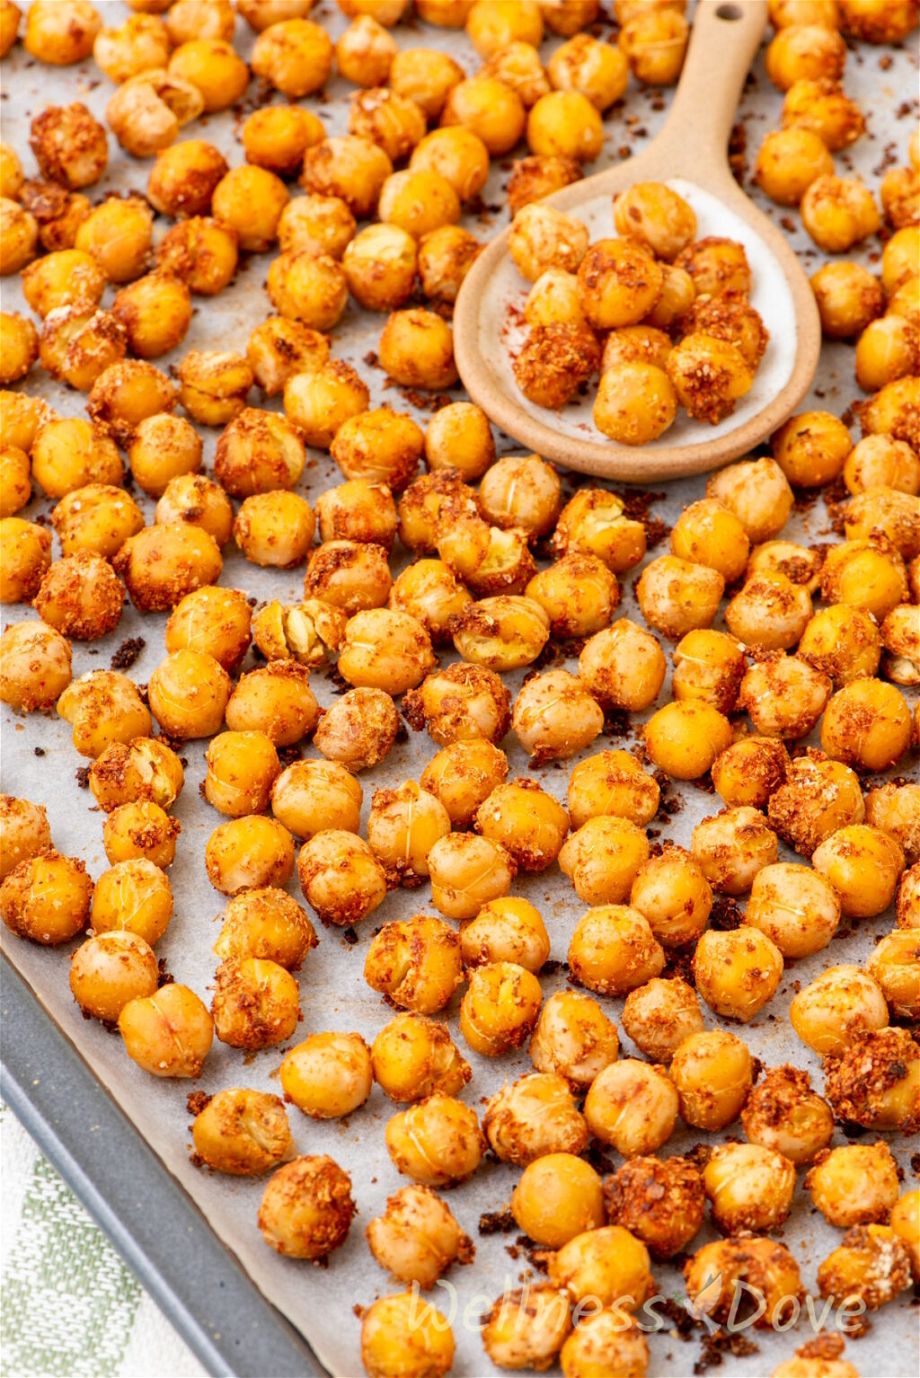 a 3/4 angled photo of the Oil-free Oven Roasted Chickpeas in a baking tray